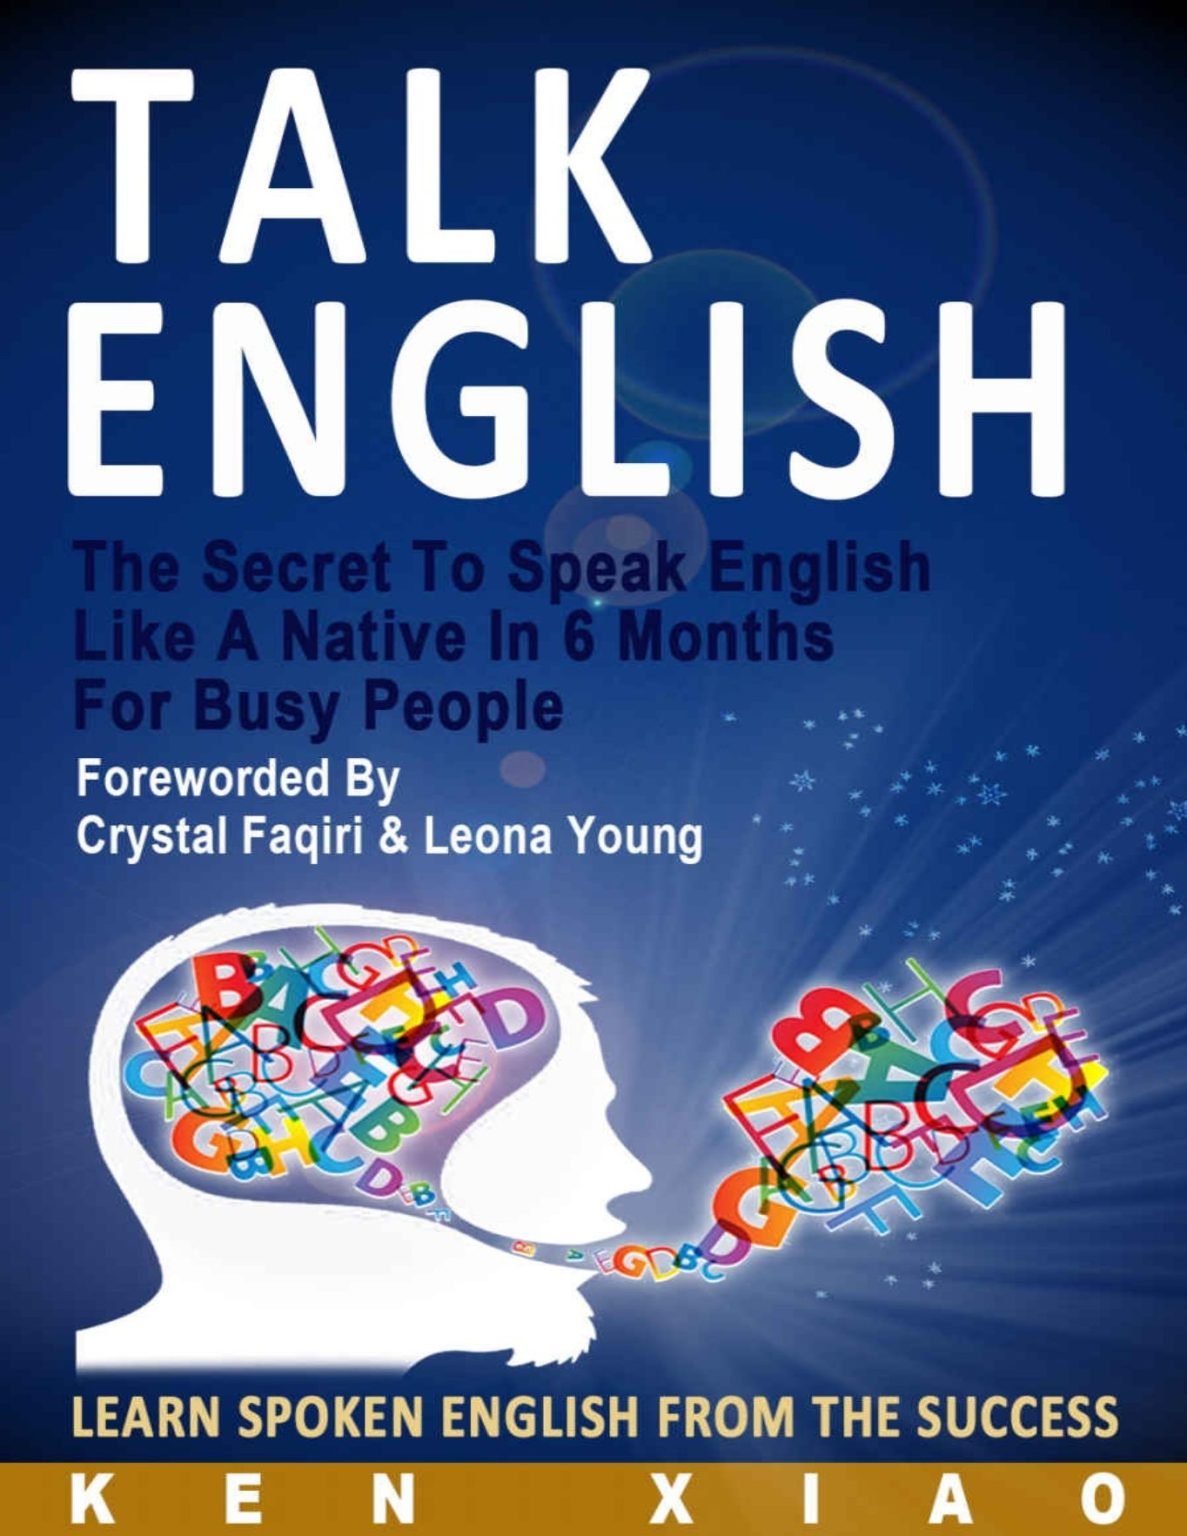 Rich results on Google's SERP when searching for ''Talk-English-The-Secret-To-Speak-English''